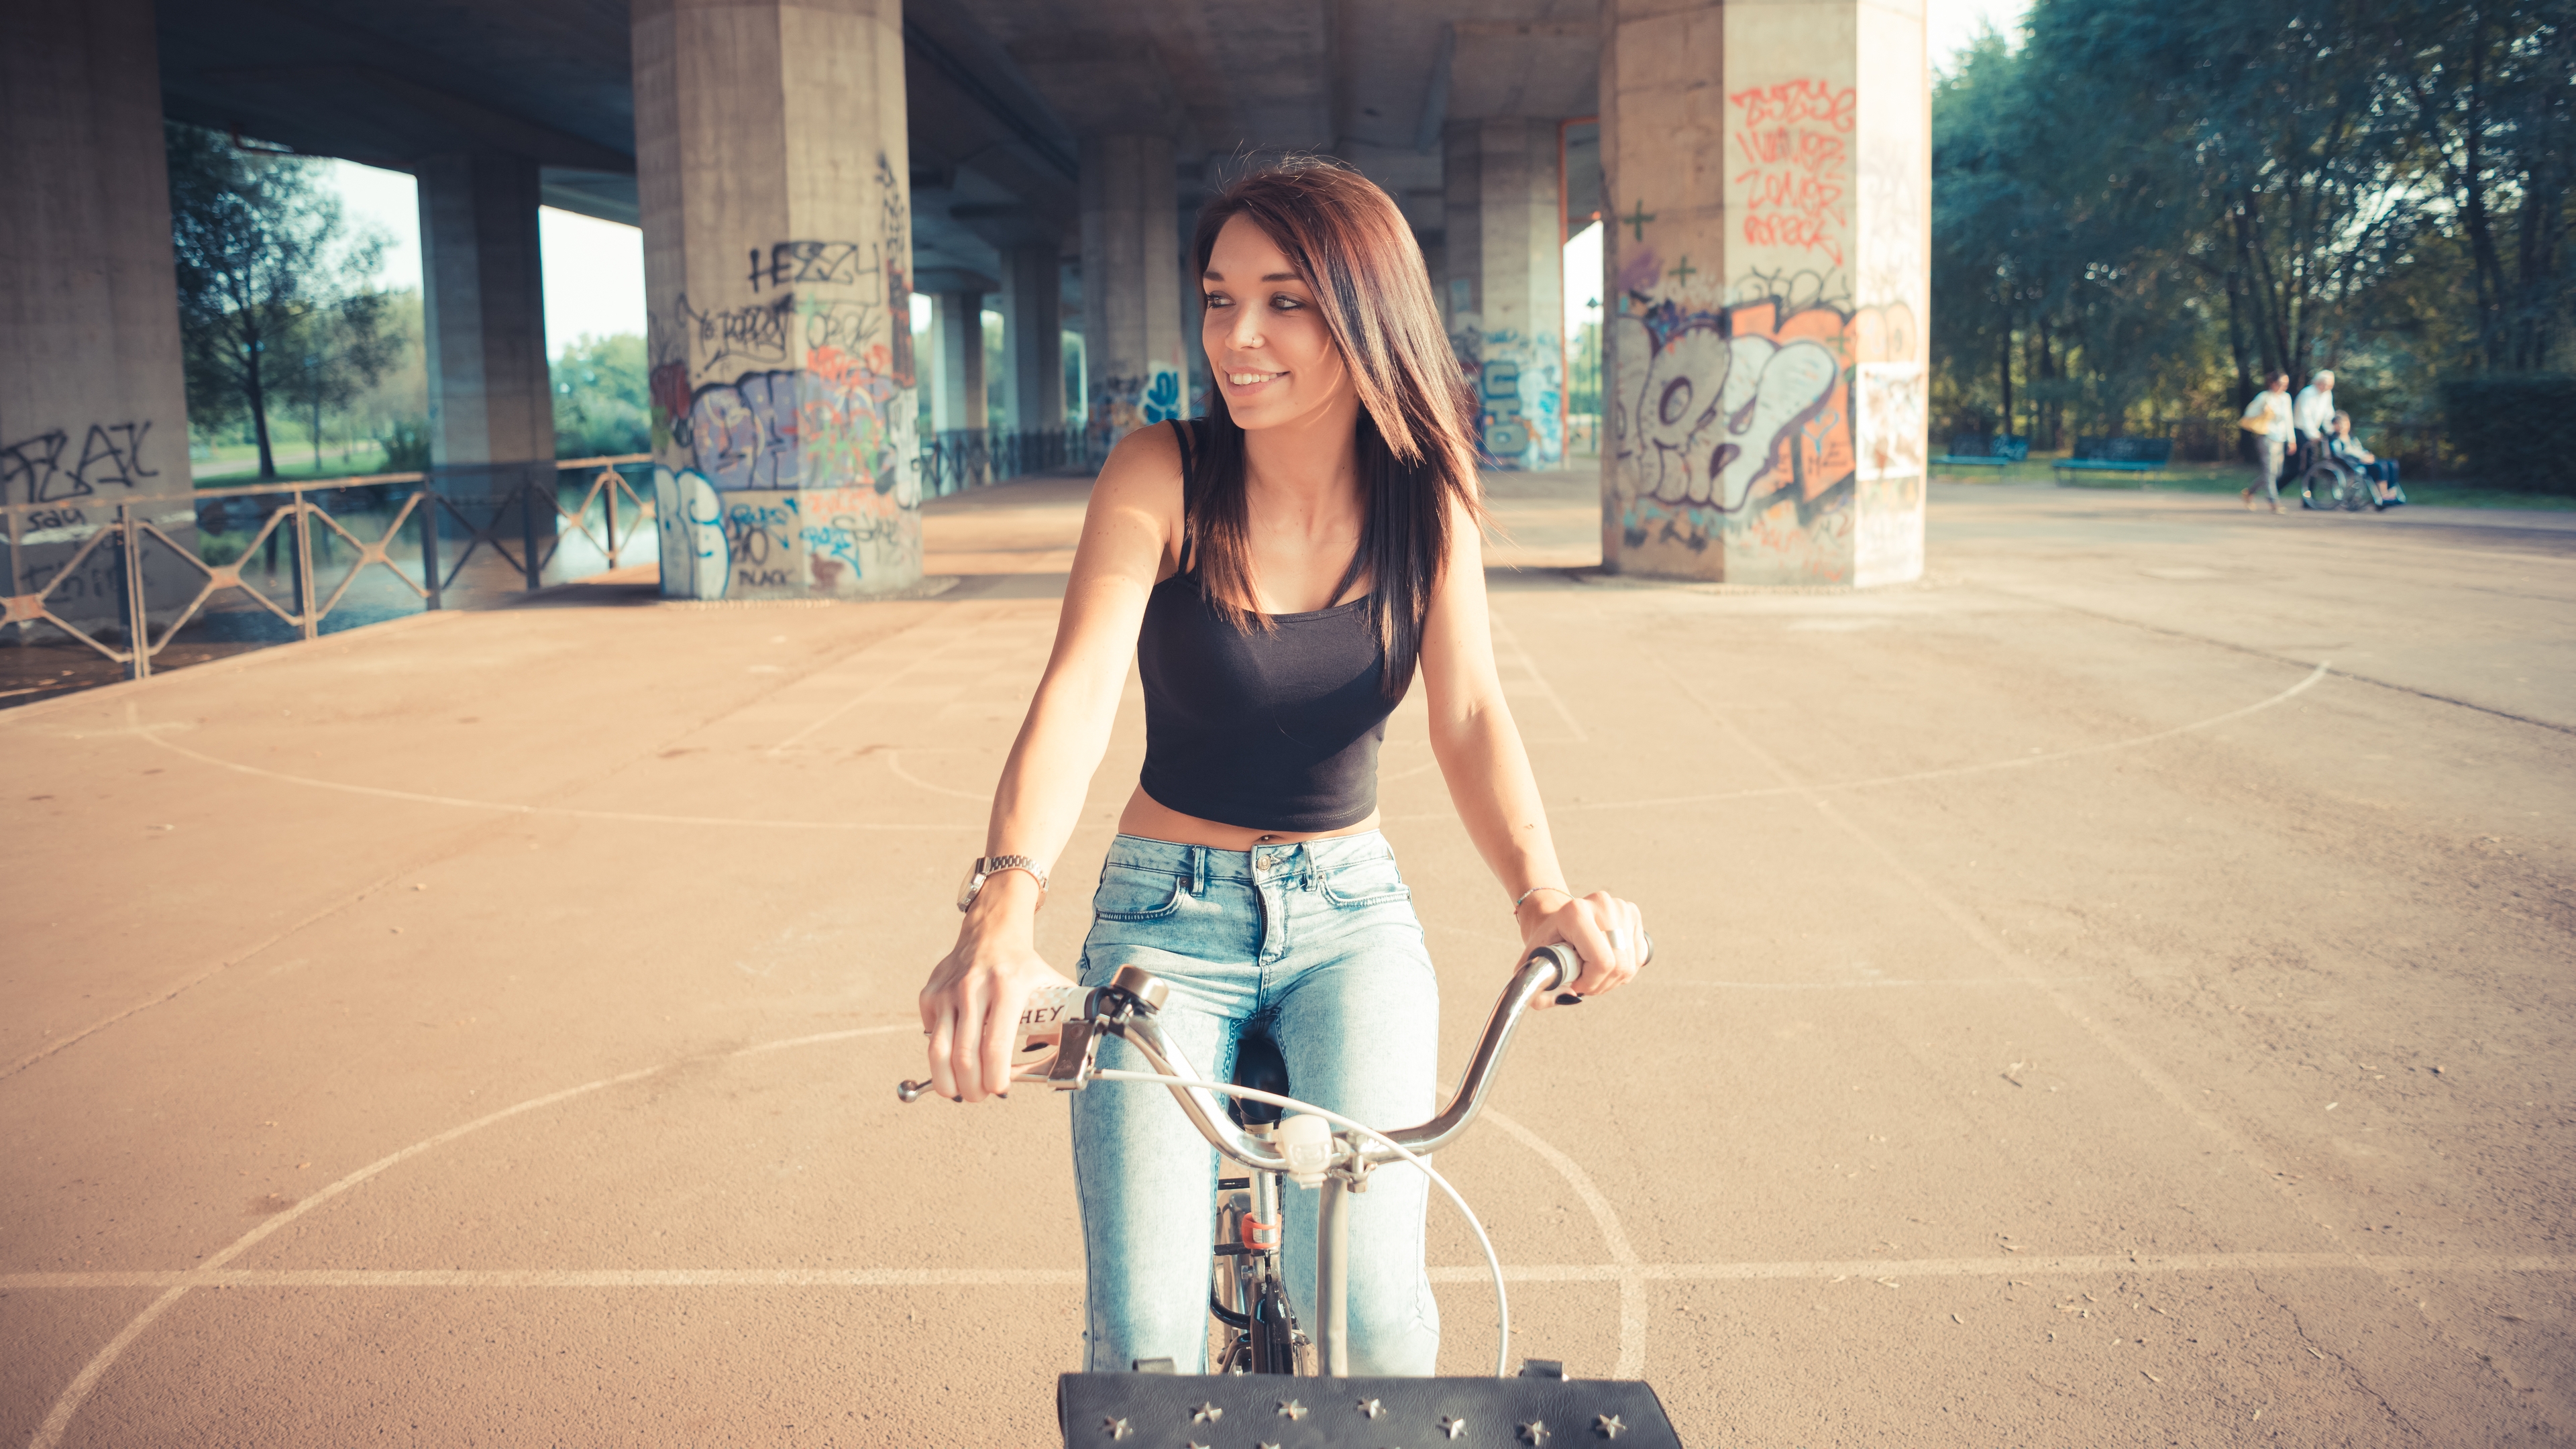 People 3840x2160 women bicycle jeans bare midriff brunette long hair graffiti smiling 4K women outdoors urban vehicle looking away outdoors women with bicycles wristwatch dyed hair black top straight hair frontal view